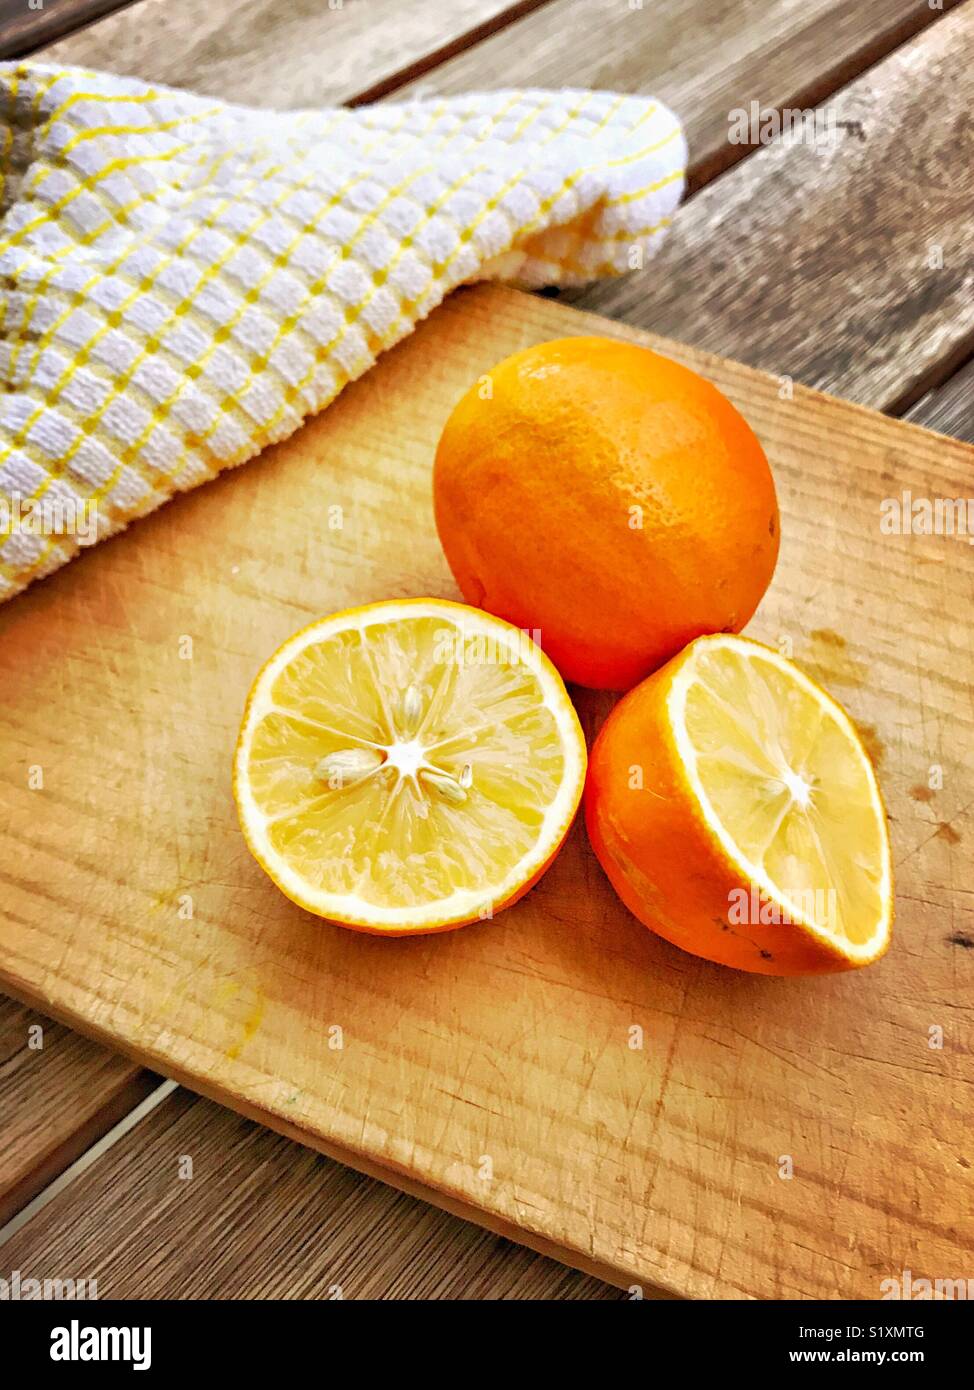 Orange skinned lemons are displayed on a cutting board showing both the whole lemon and one cut in half. Stock Photo